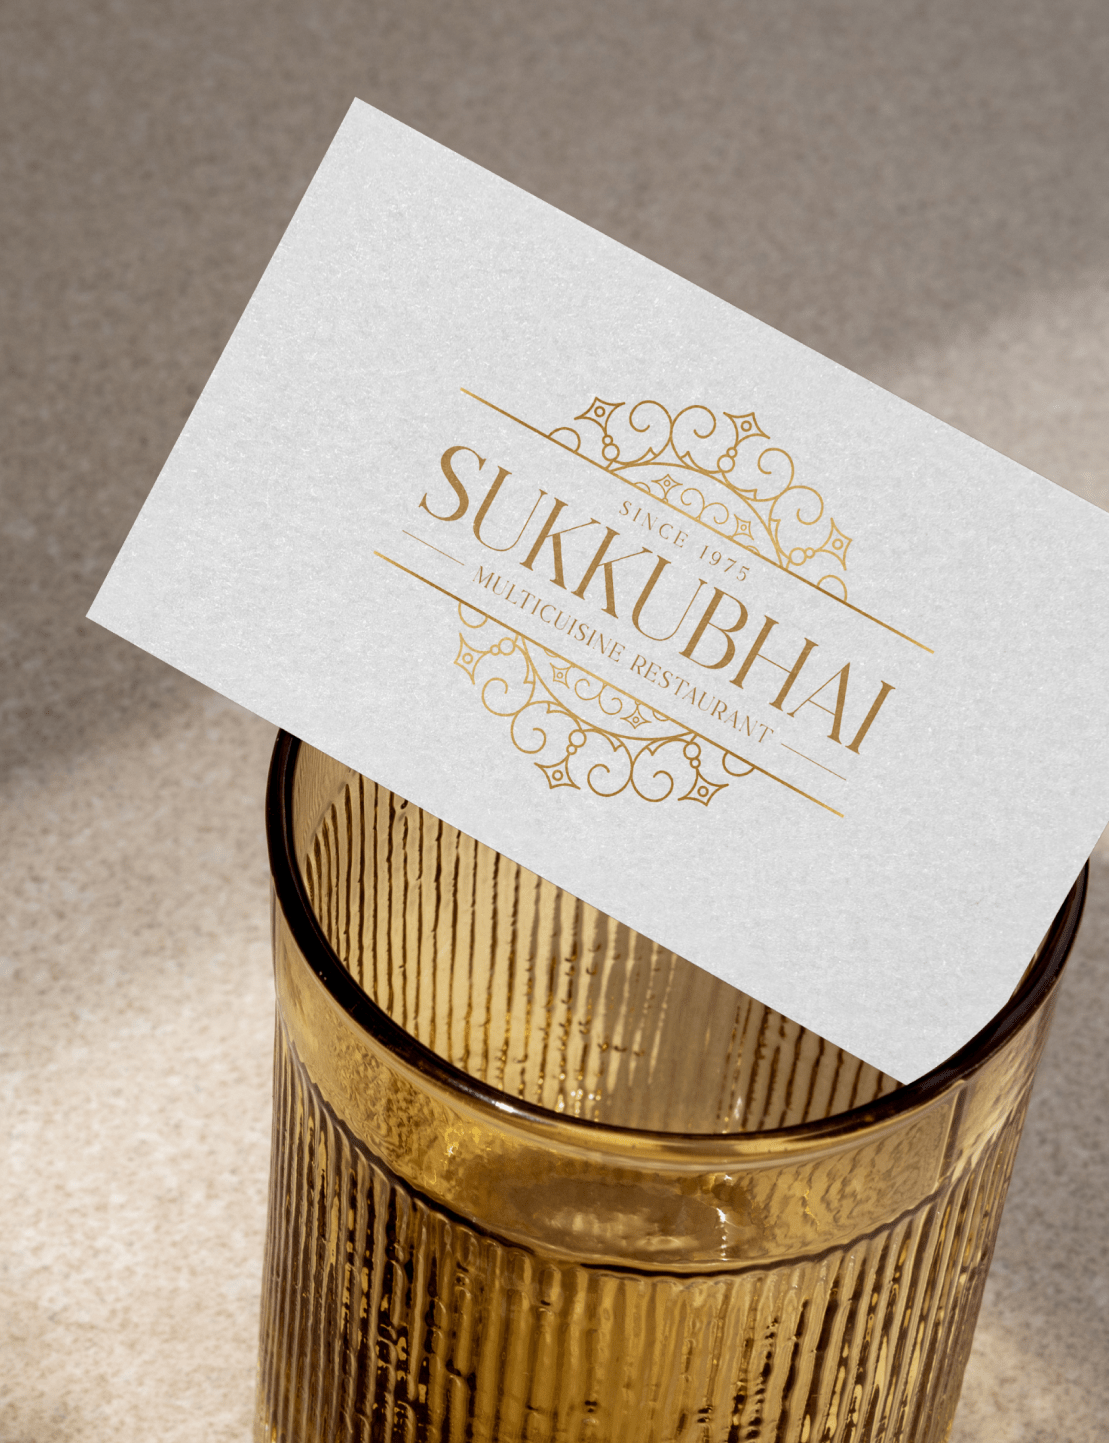 Wings food branding image for restaurant Sukkubhai based out of India